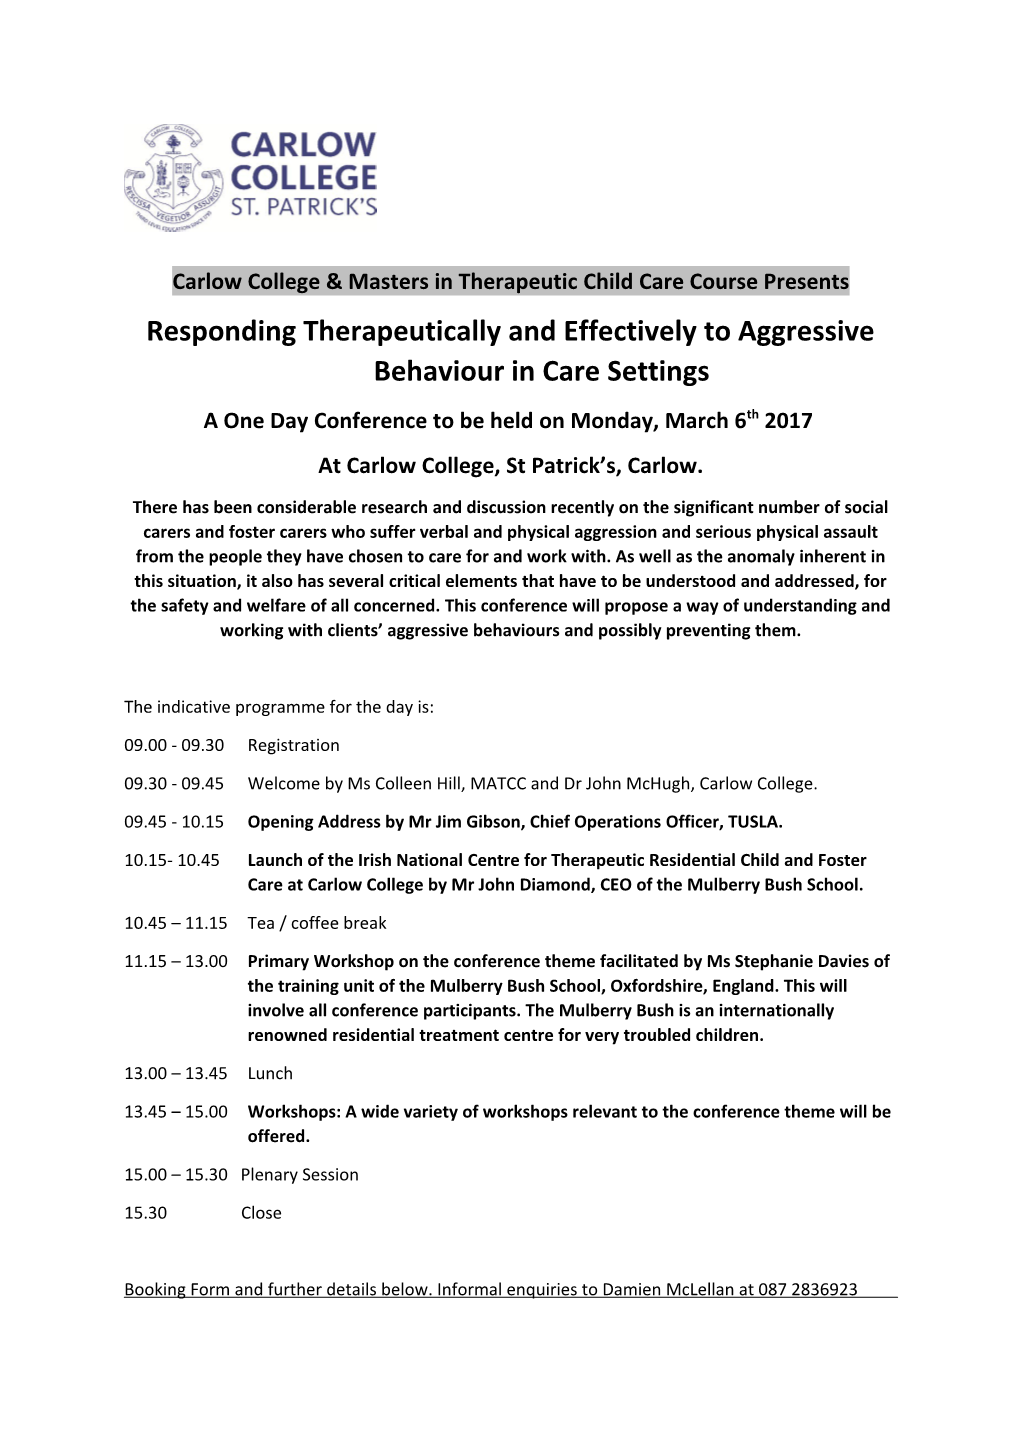 Carlow College & Masters in Therapeutic Child Care Course Presents